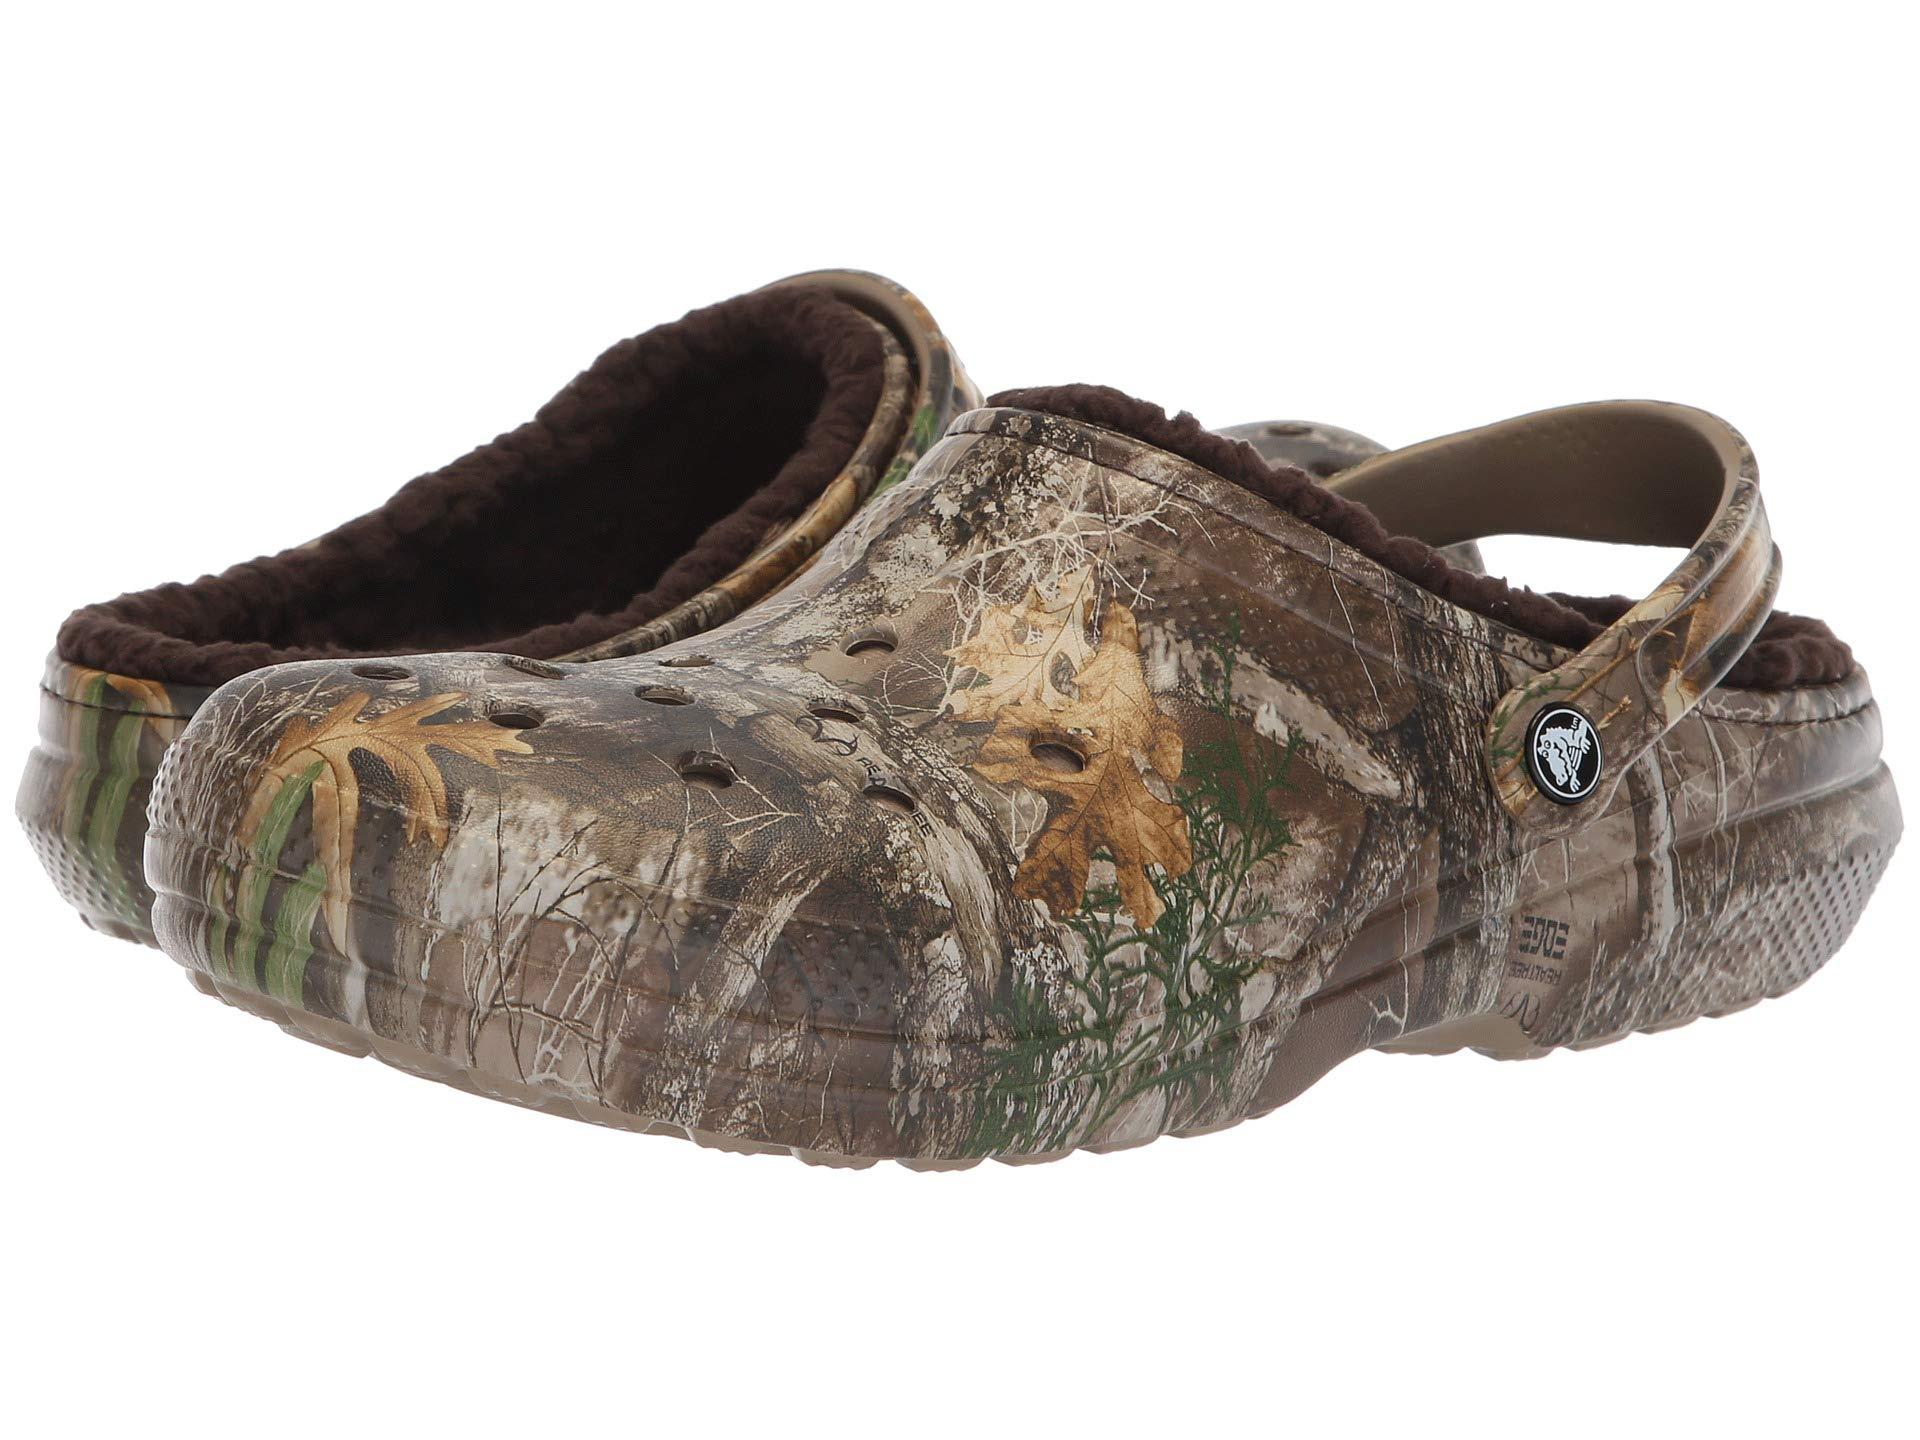 Crocs™ Unisex Adults' Clssc Lined Realtree Edge Clog U in Chocolate ...